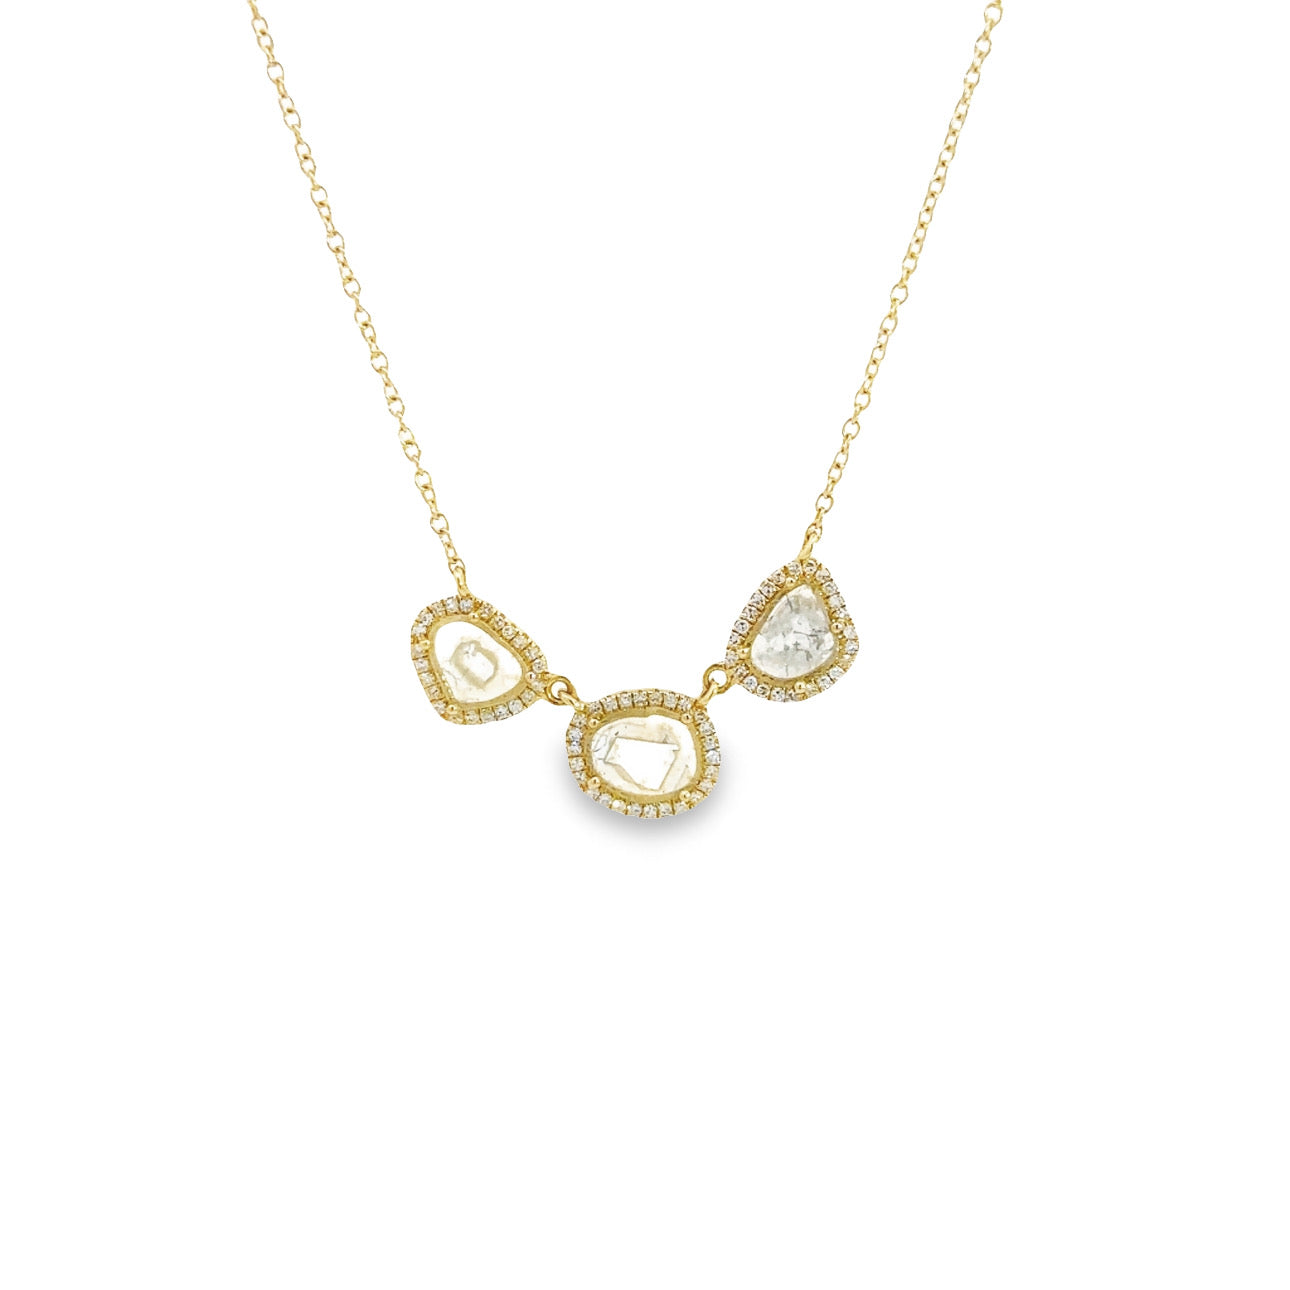 WD1226 14kt Yellow Gold 3 sliced Diamond Necklace